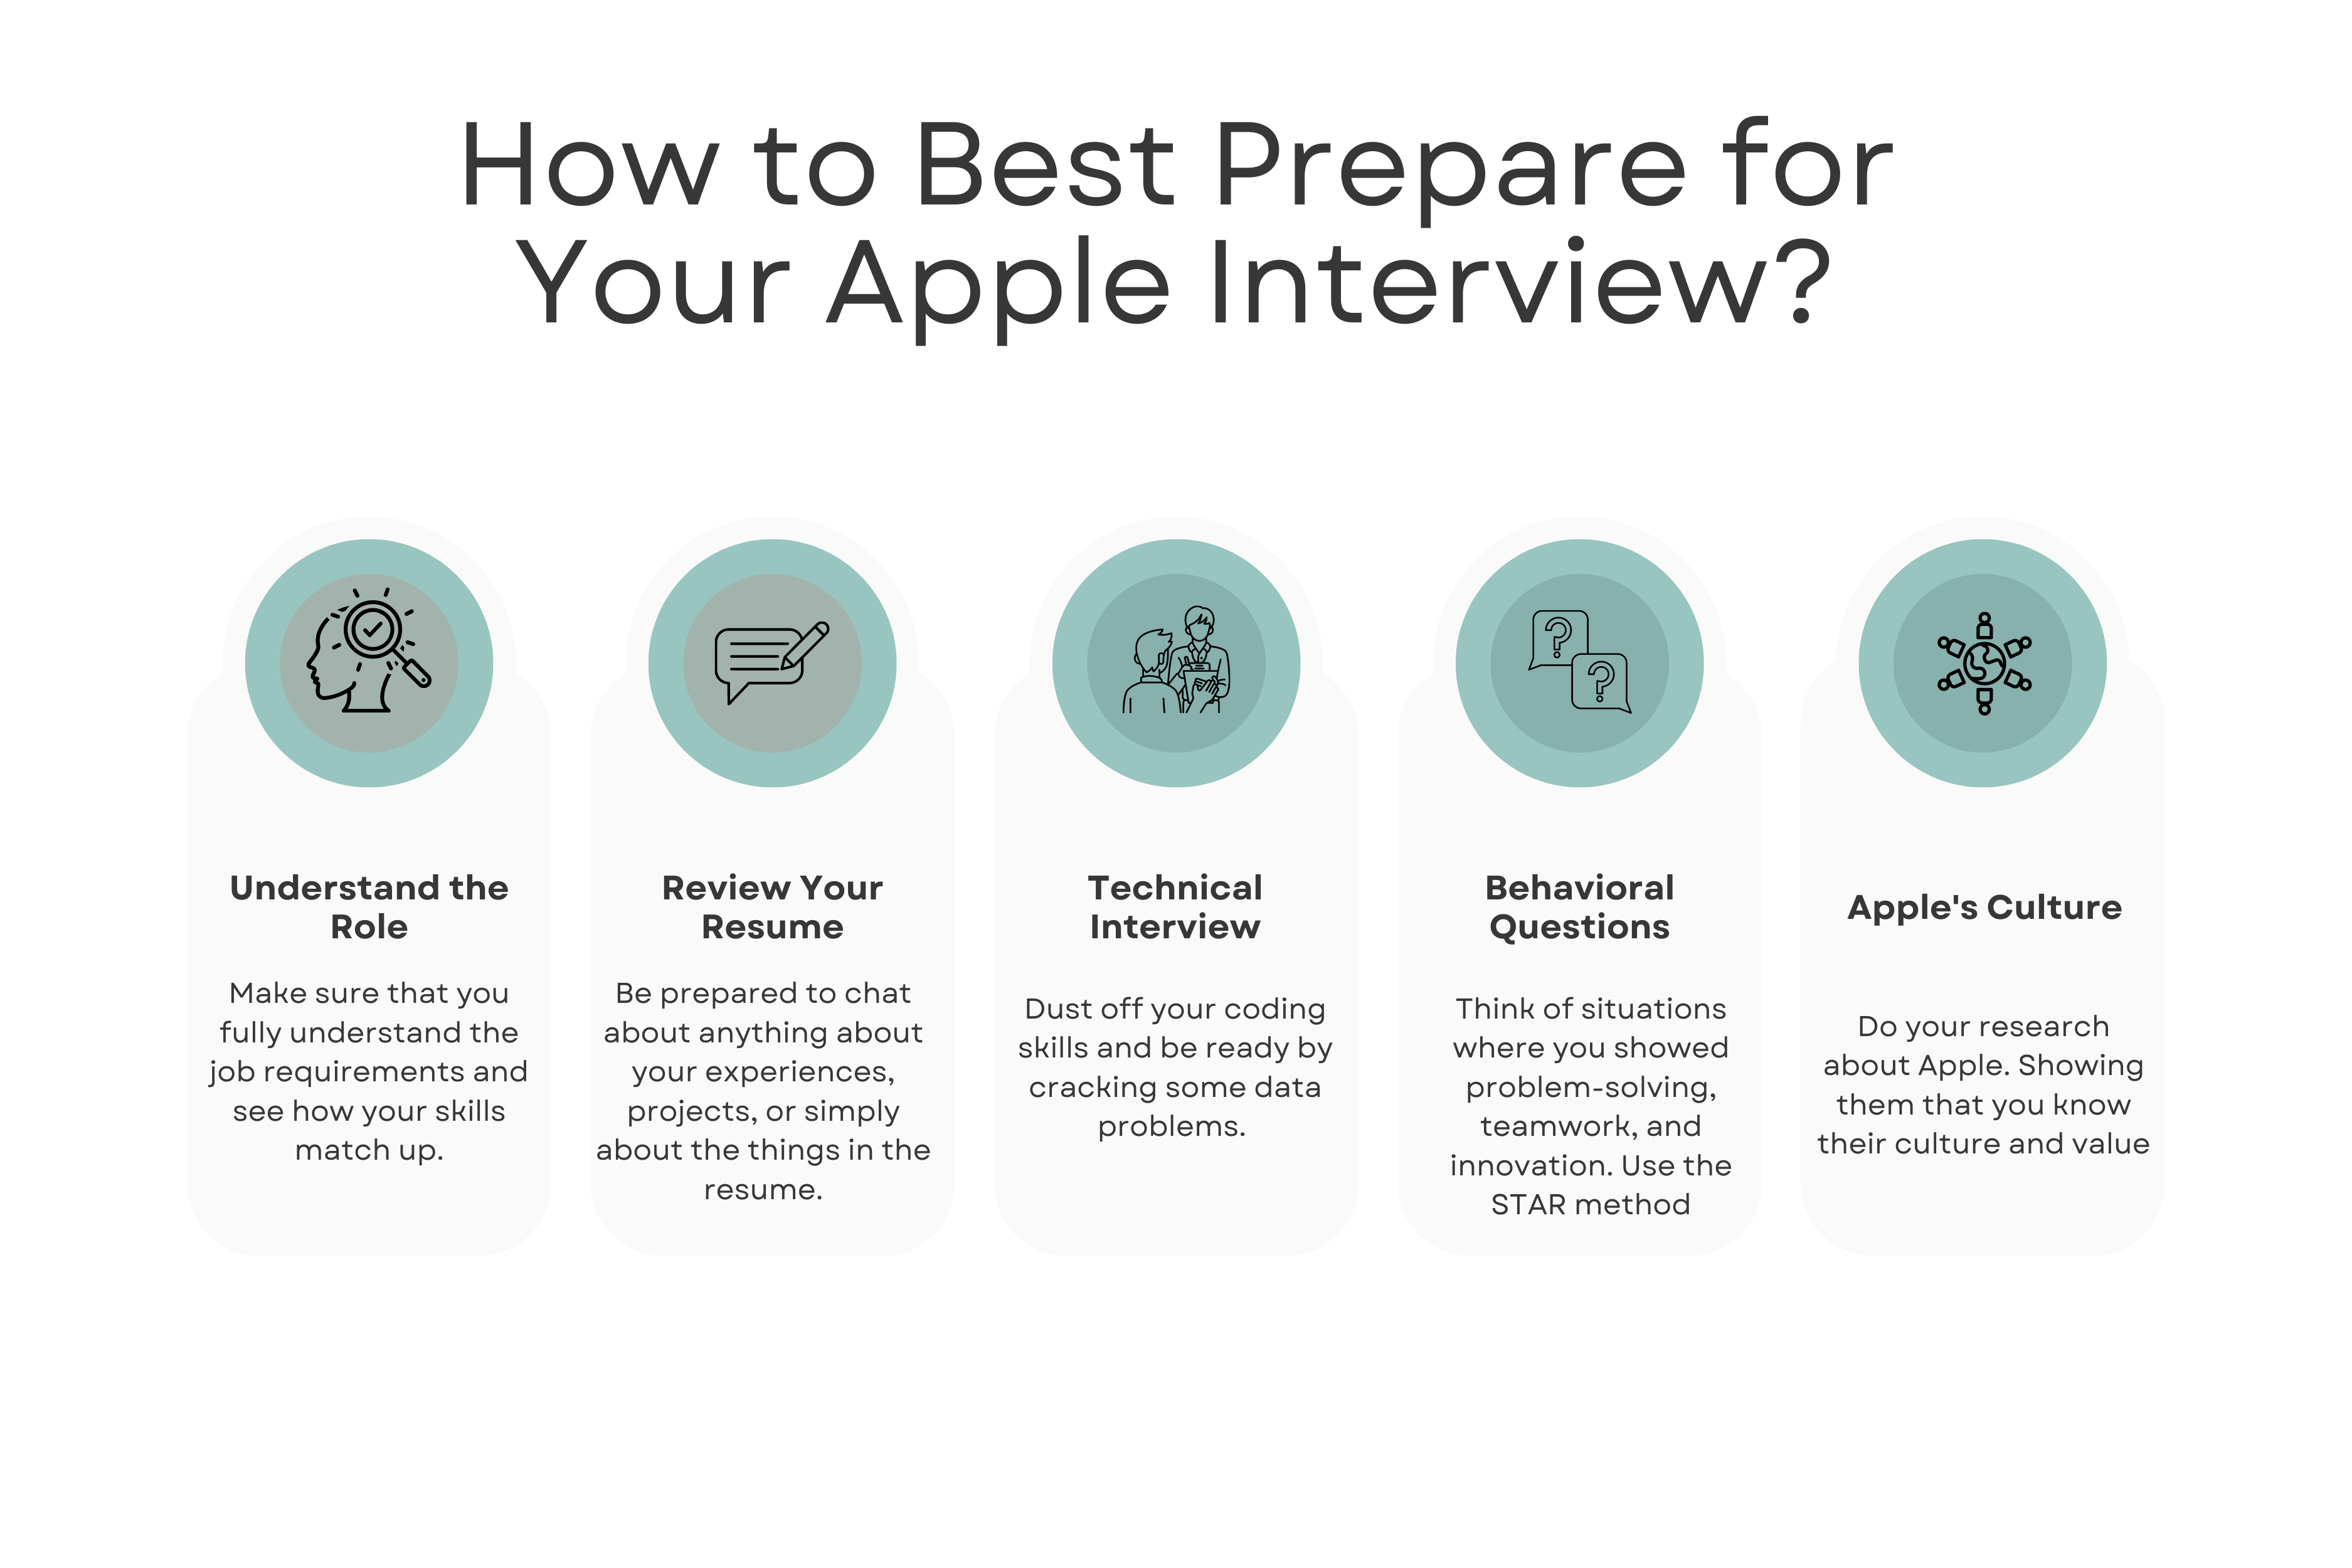 How to Best Prepare for Your Apple Interview